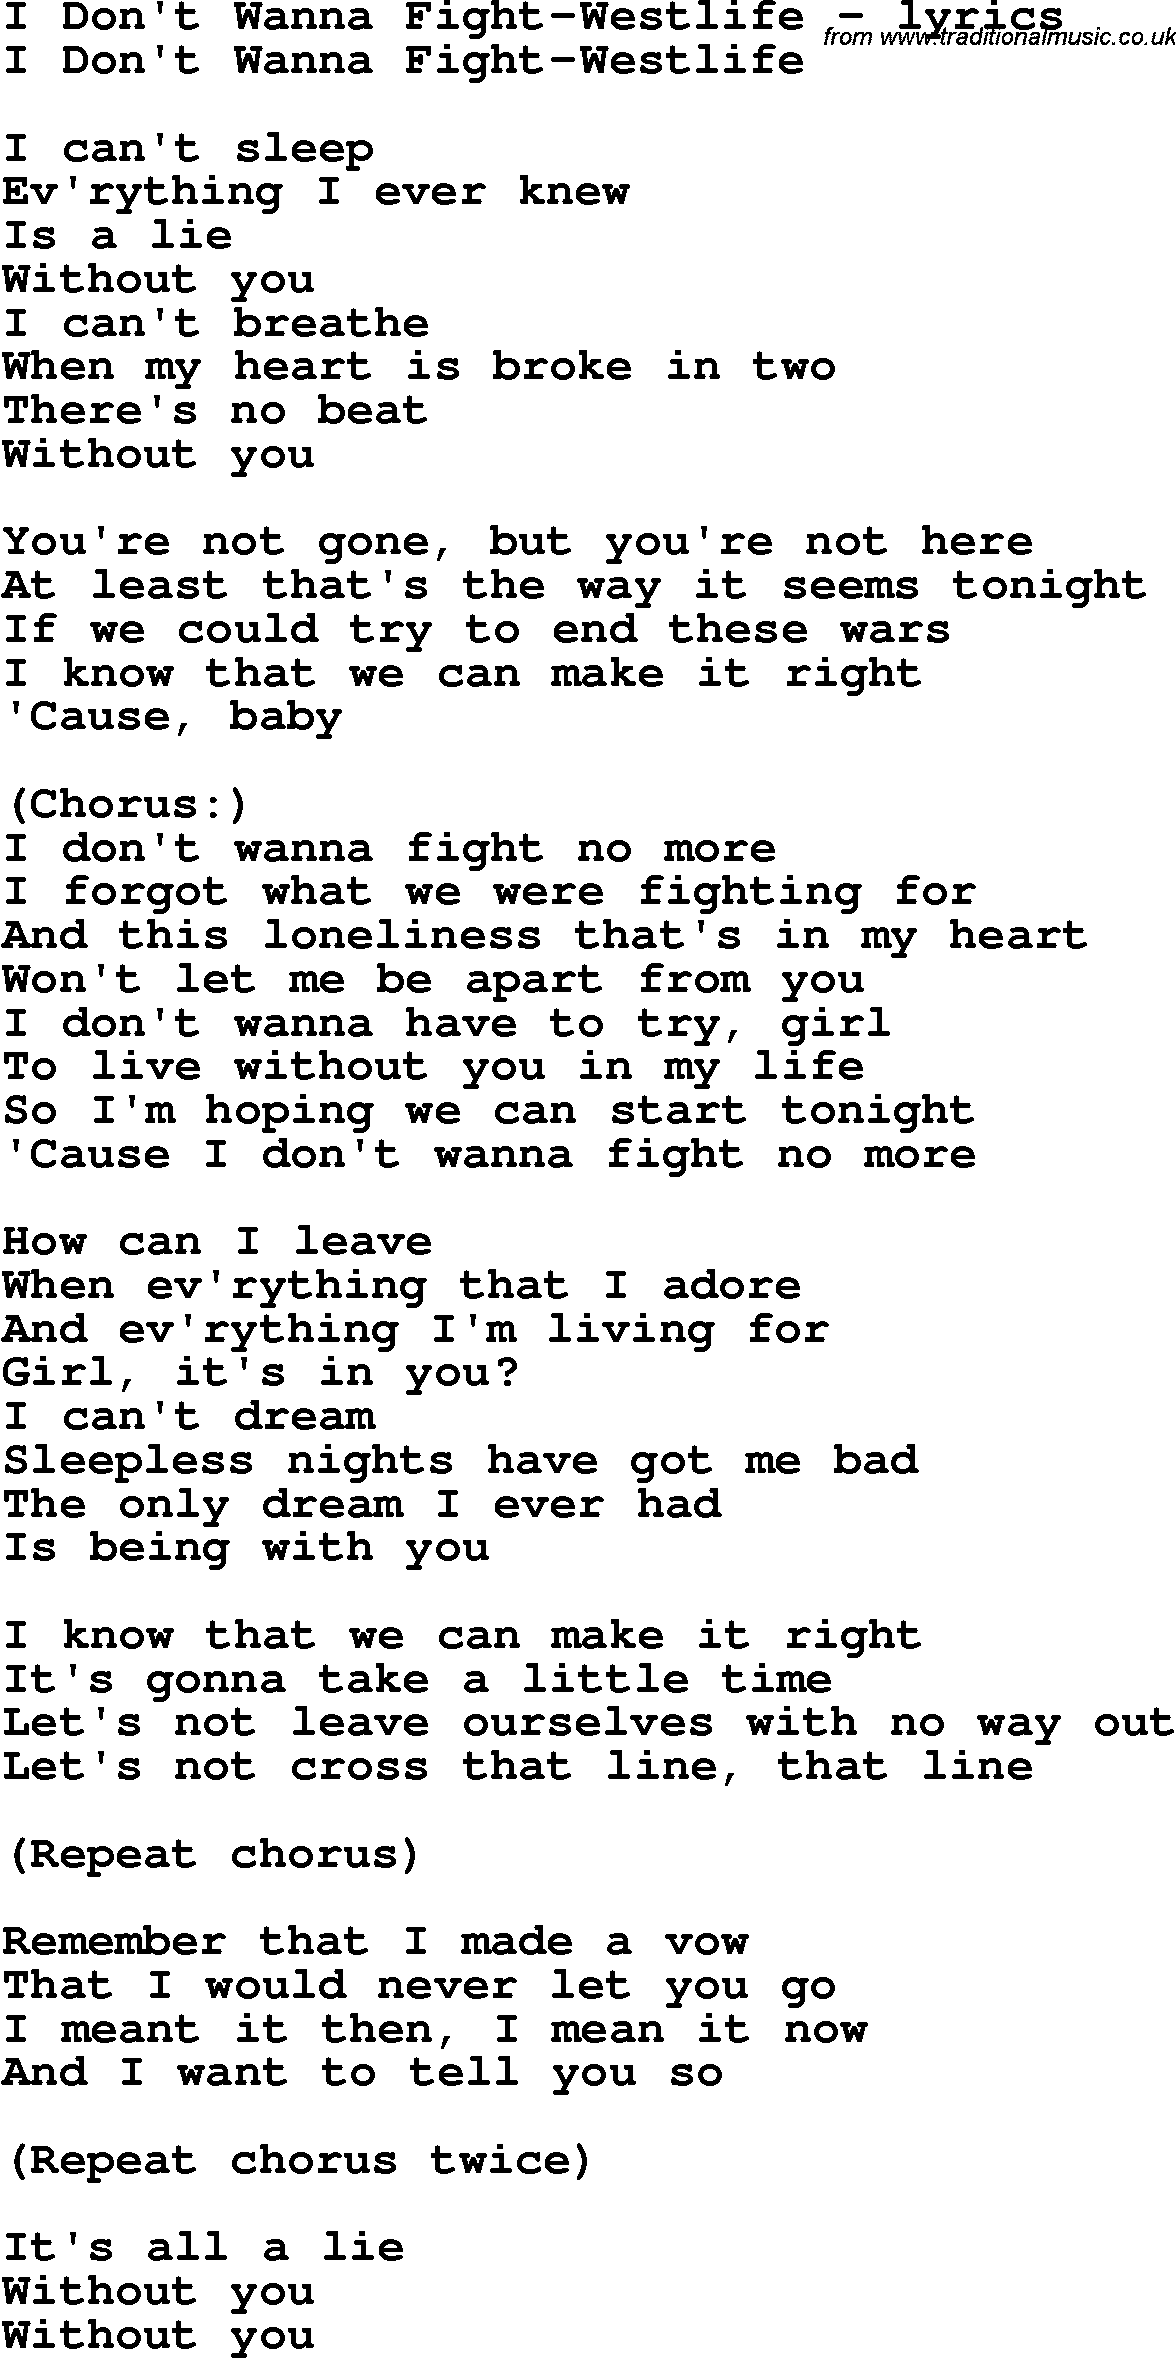 Love Song Lyrics for: I Don't Wanna Fight-Westlife